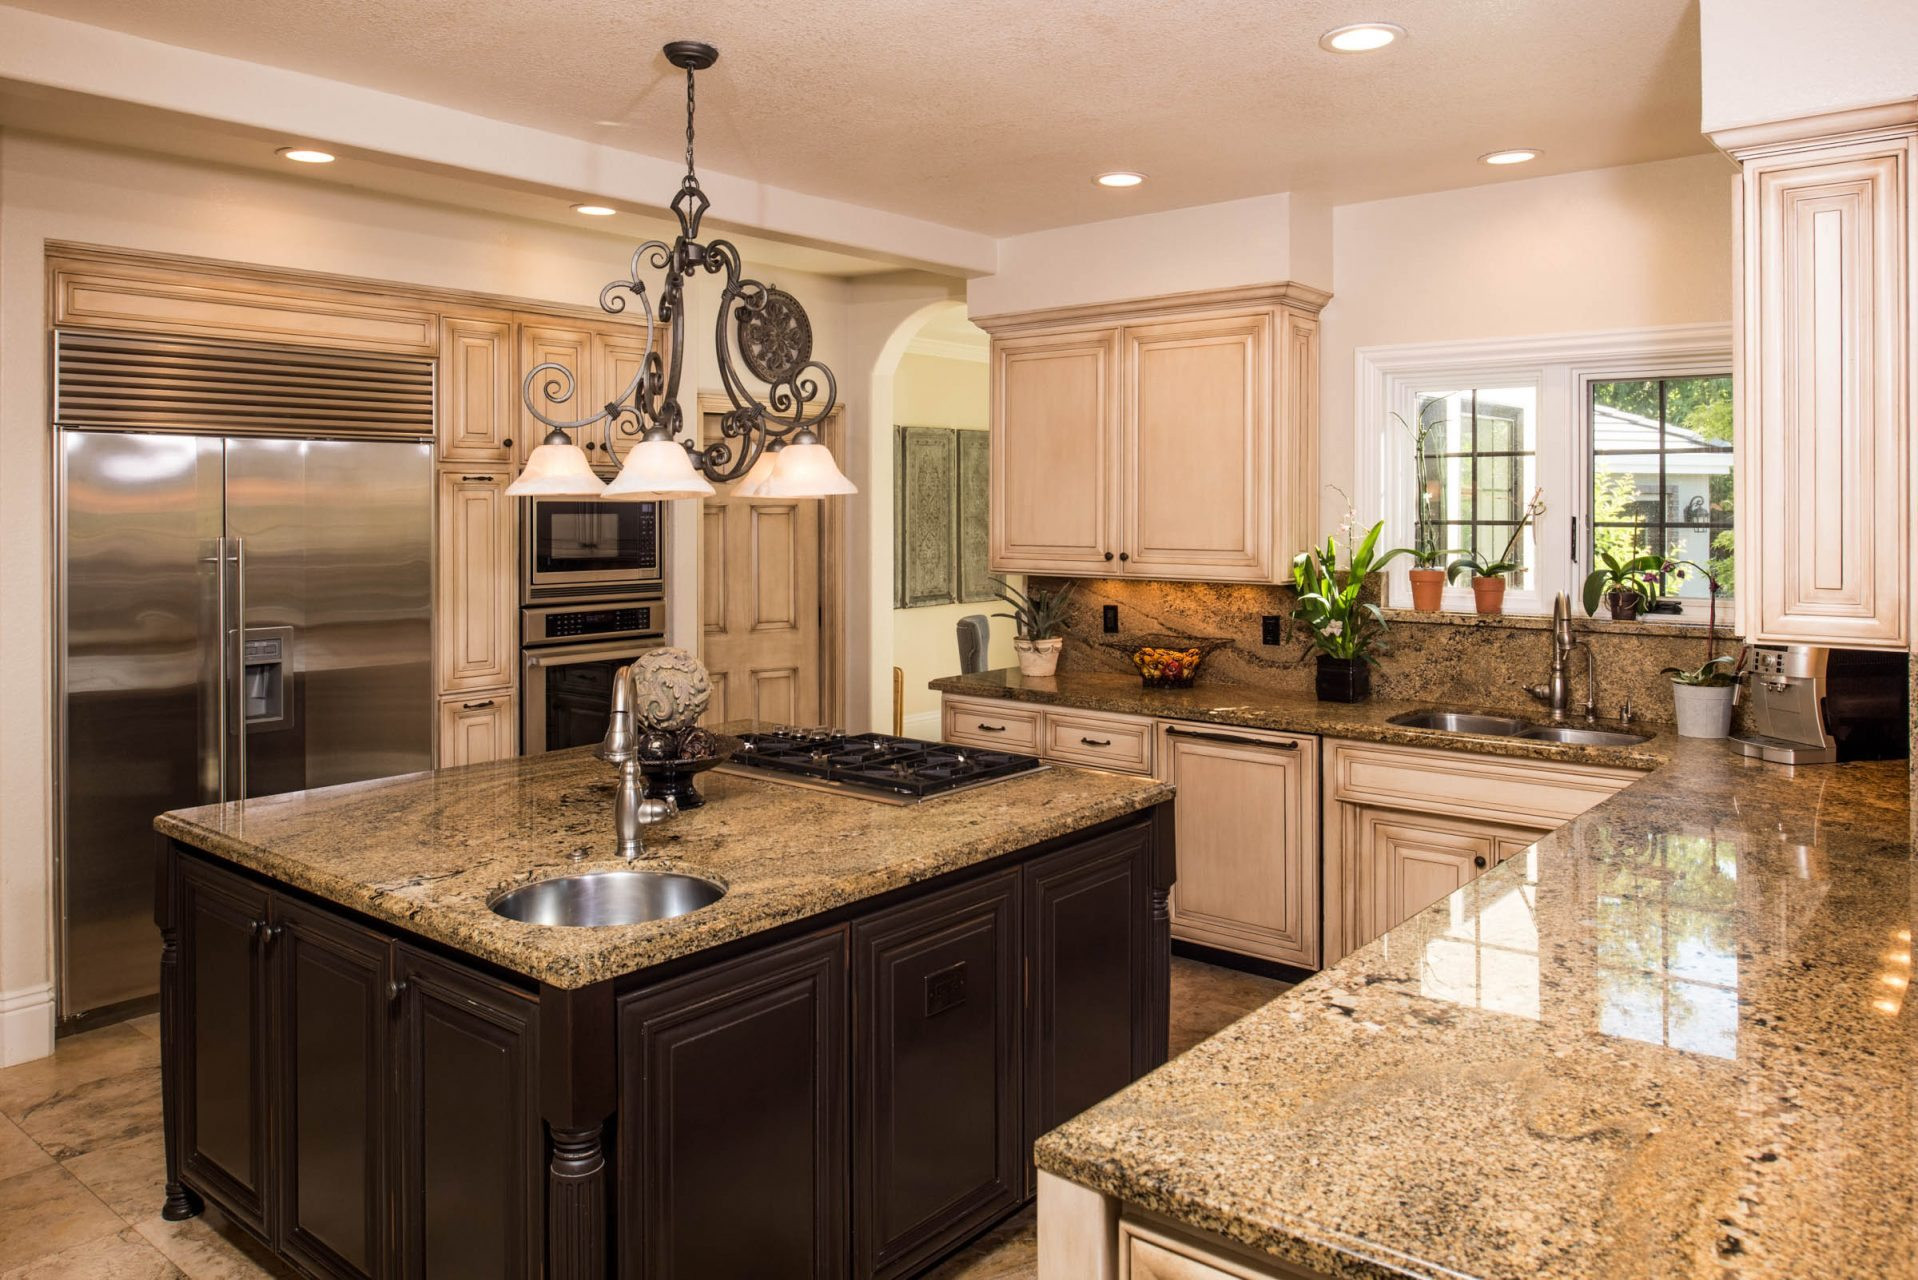 Kitchen Remodeling Photo
 Building Pros Home Remodeling Experts in Danville CA